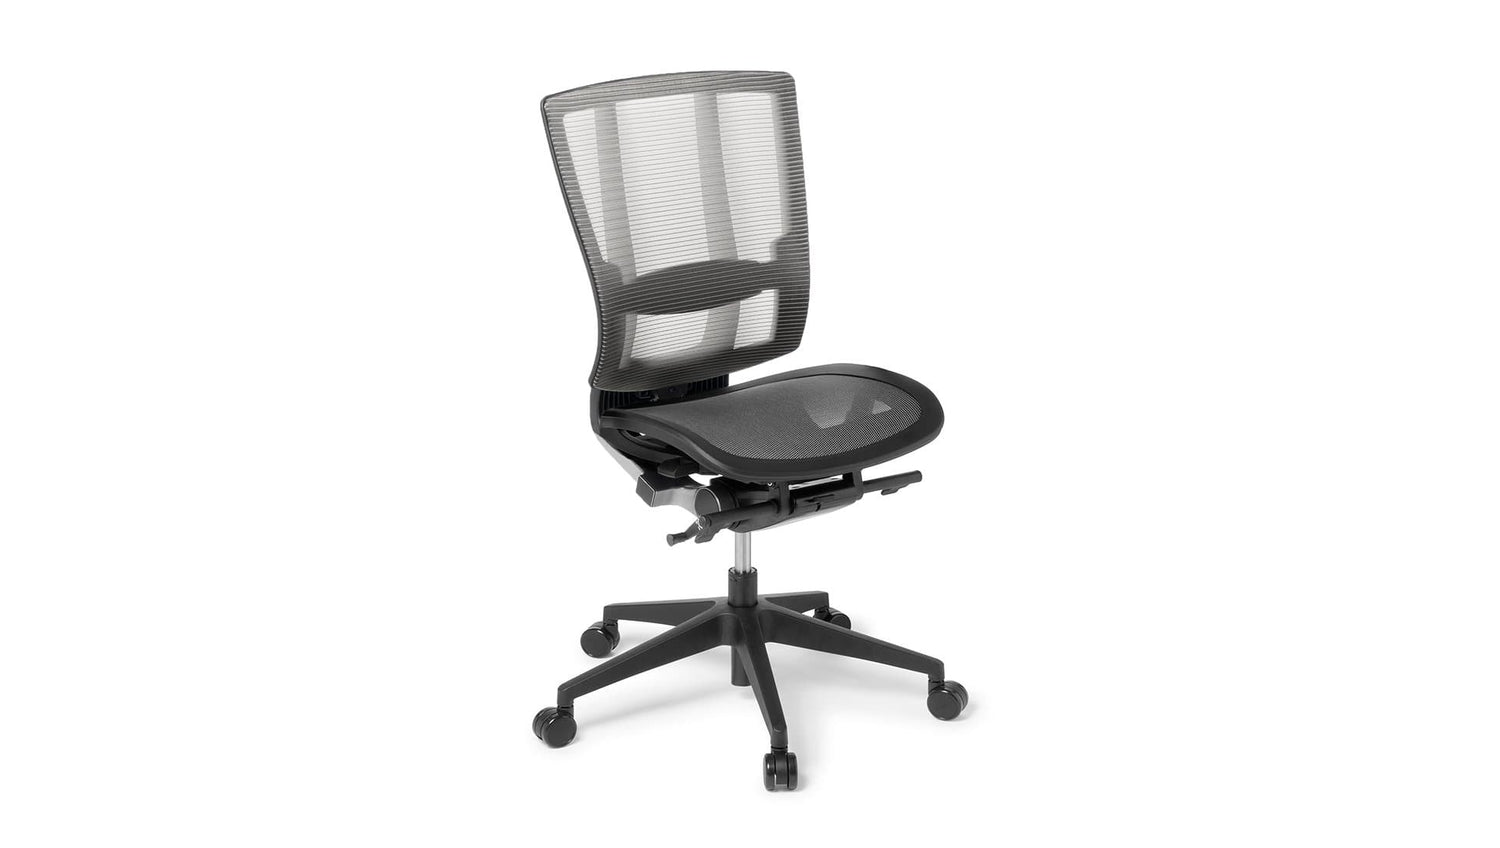 Seating Mesh / Do not include / Black Nylon Cloud Ergo Chair